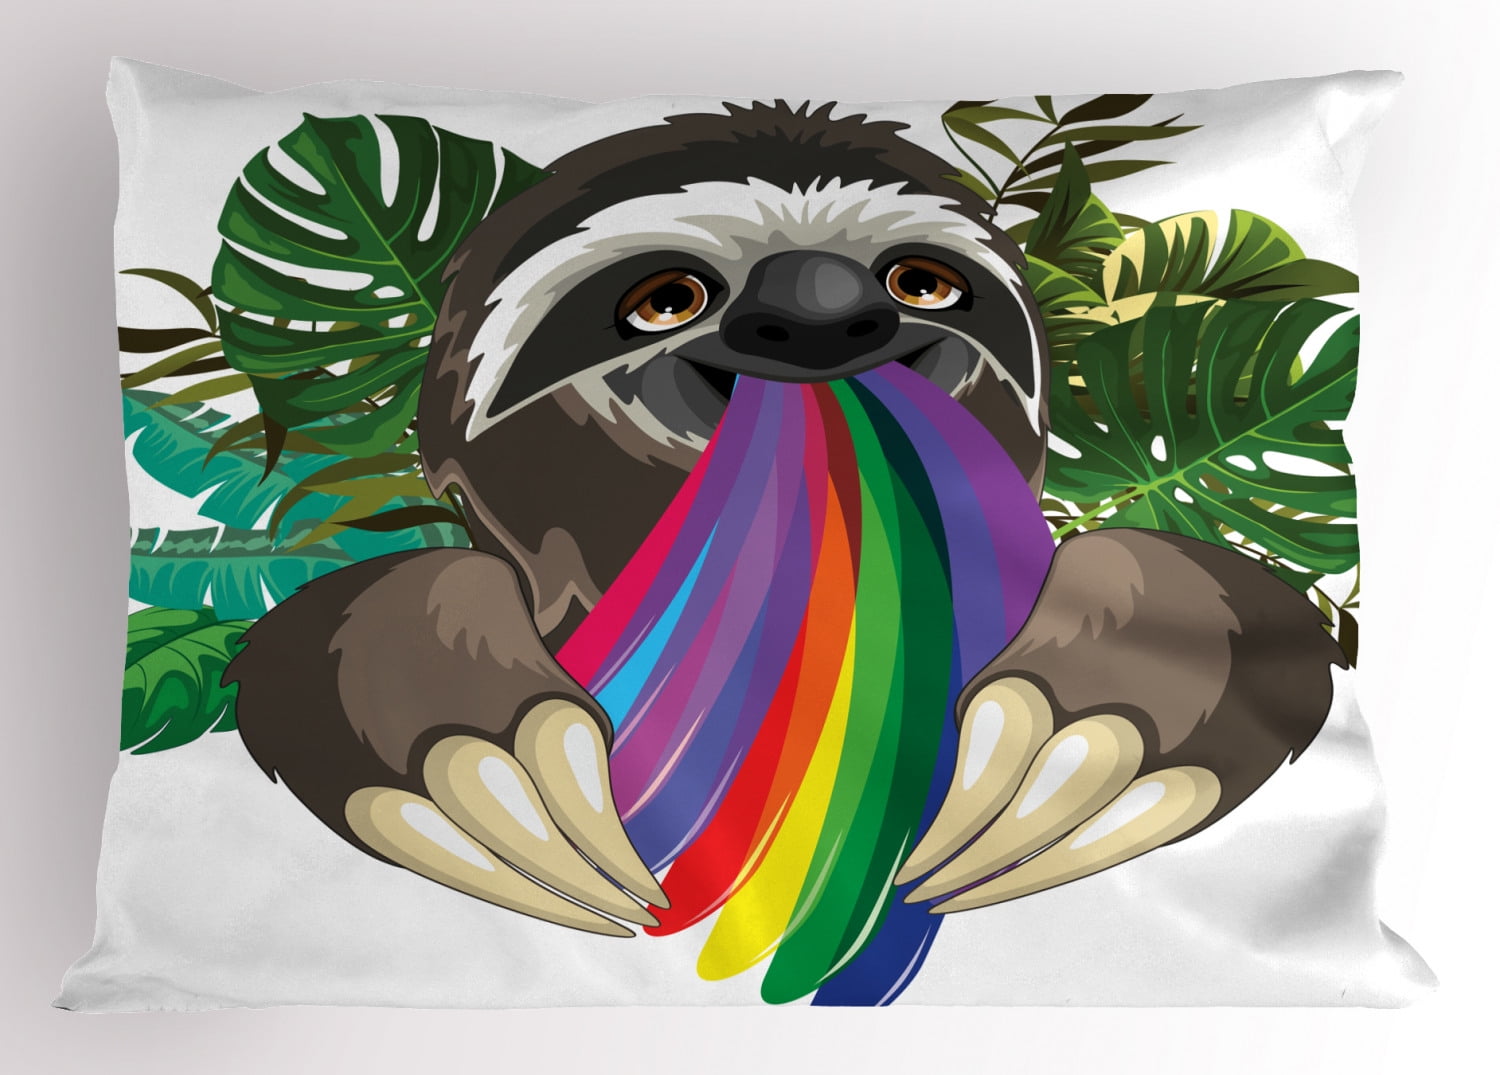 Multicolor Cold Weather Animal Designs Cute Christmas Sloth Sleeping in Tree with Lights Santa Hat Throw Pillow 16x16